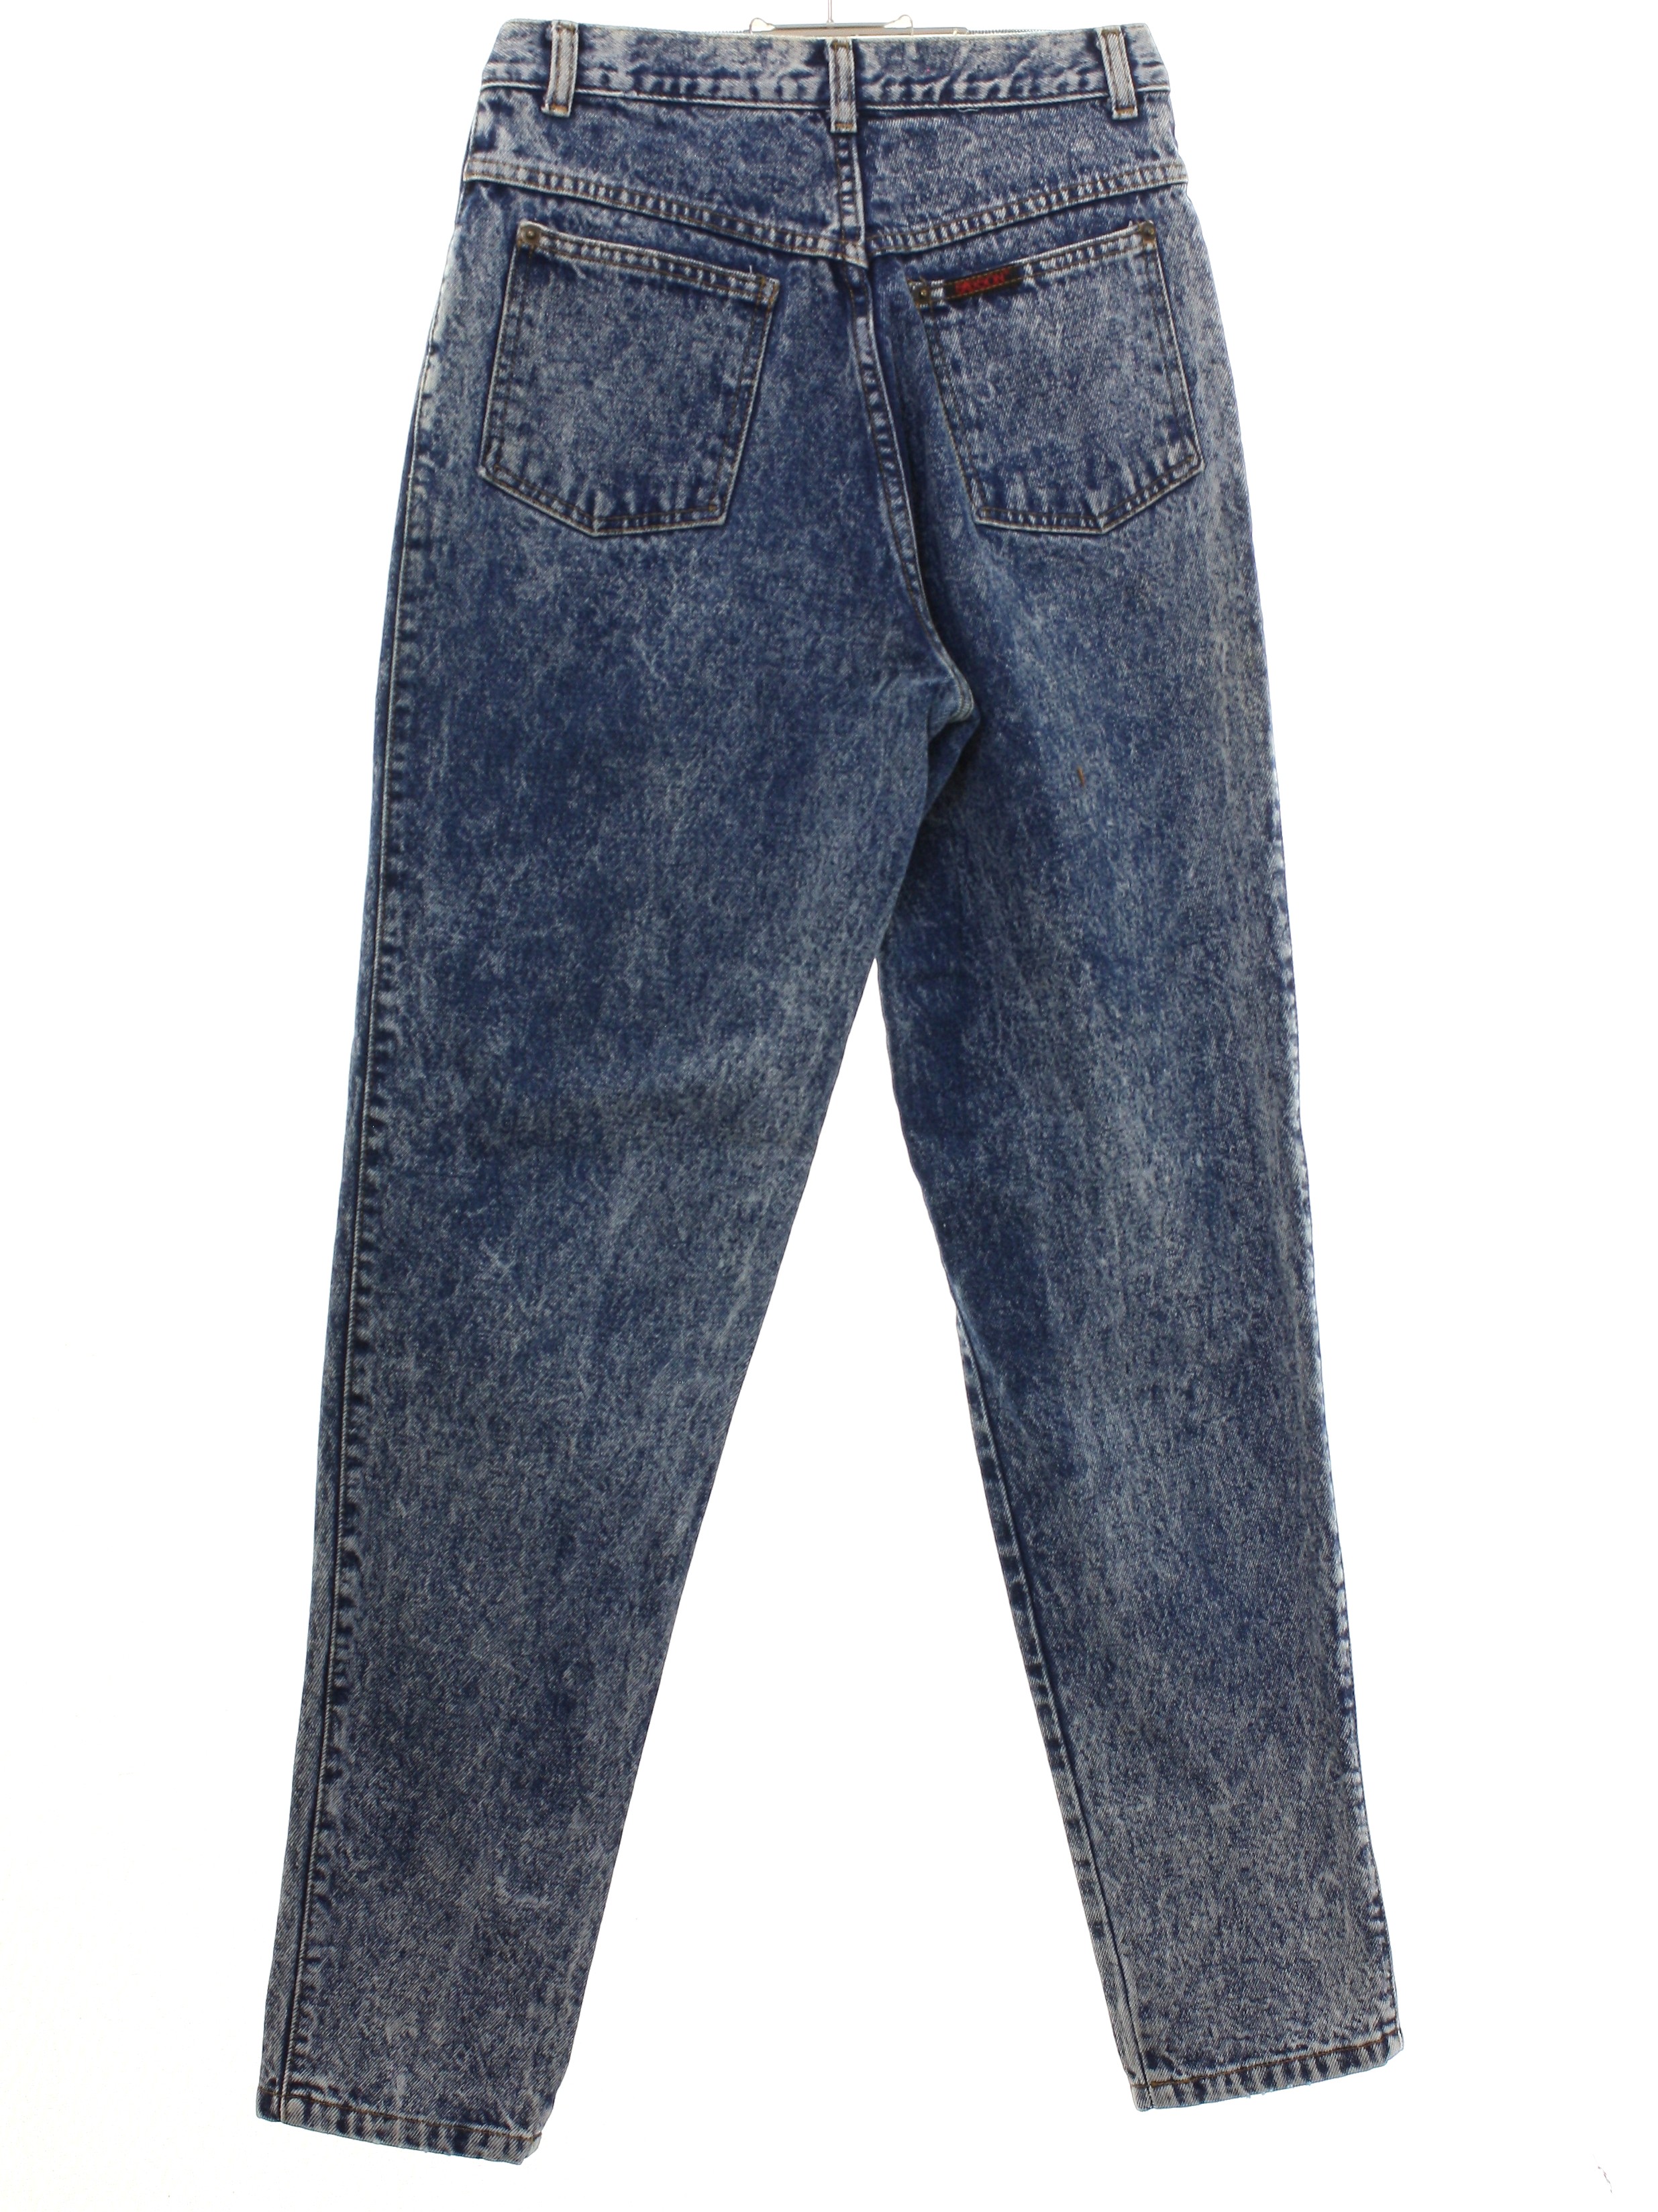 mens high waisted jeans 80s